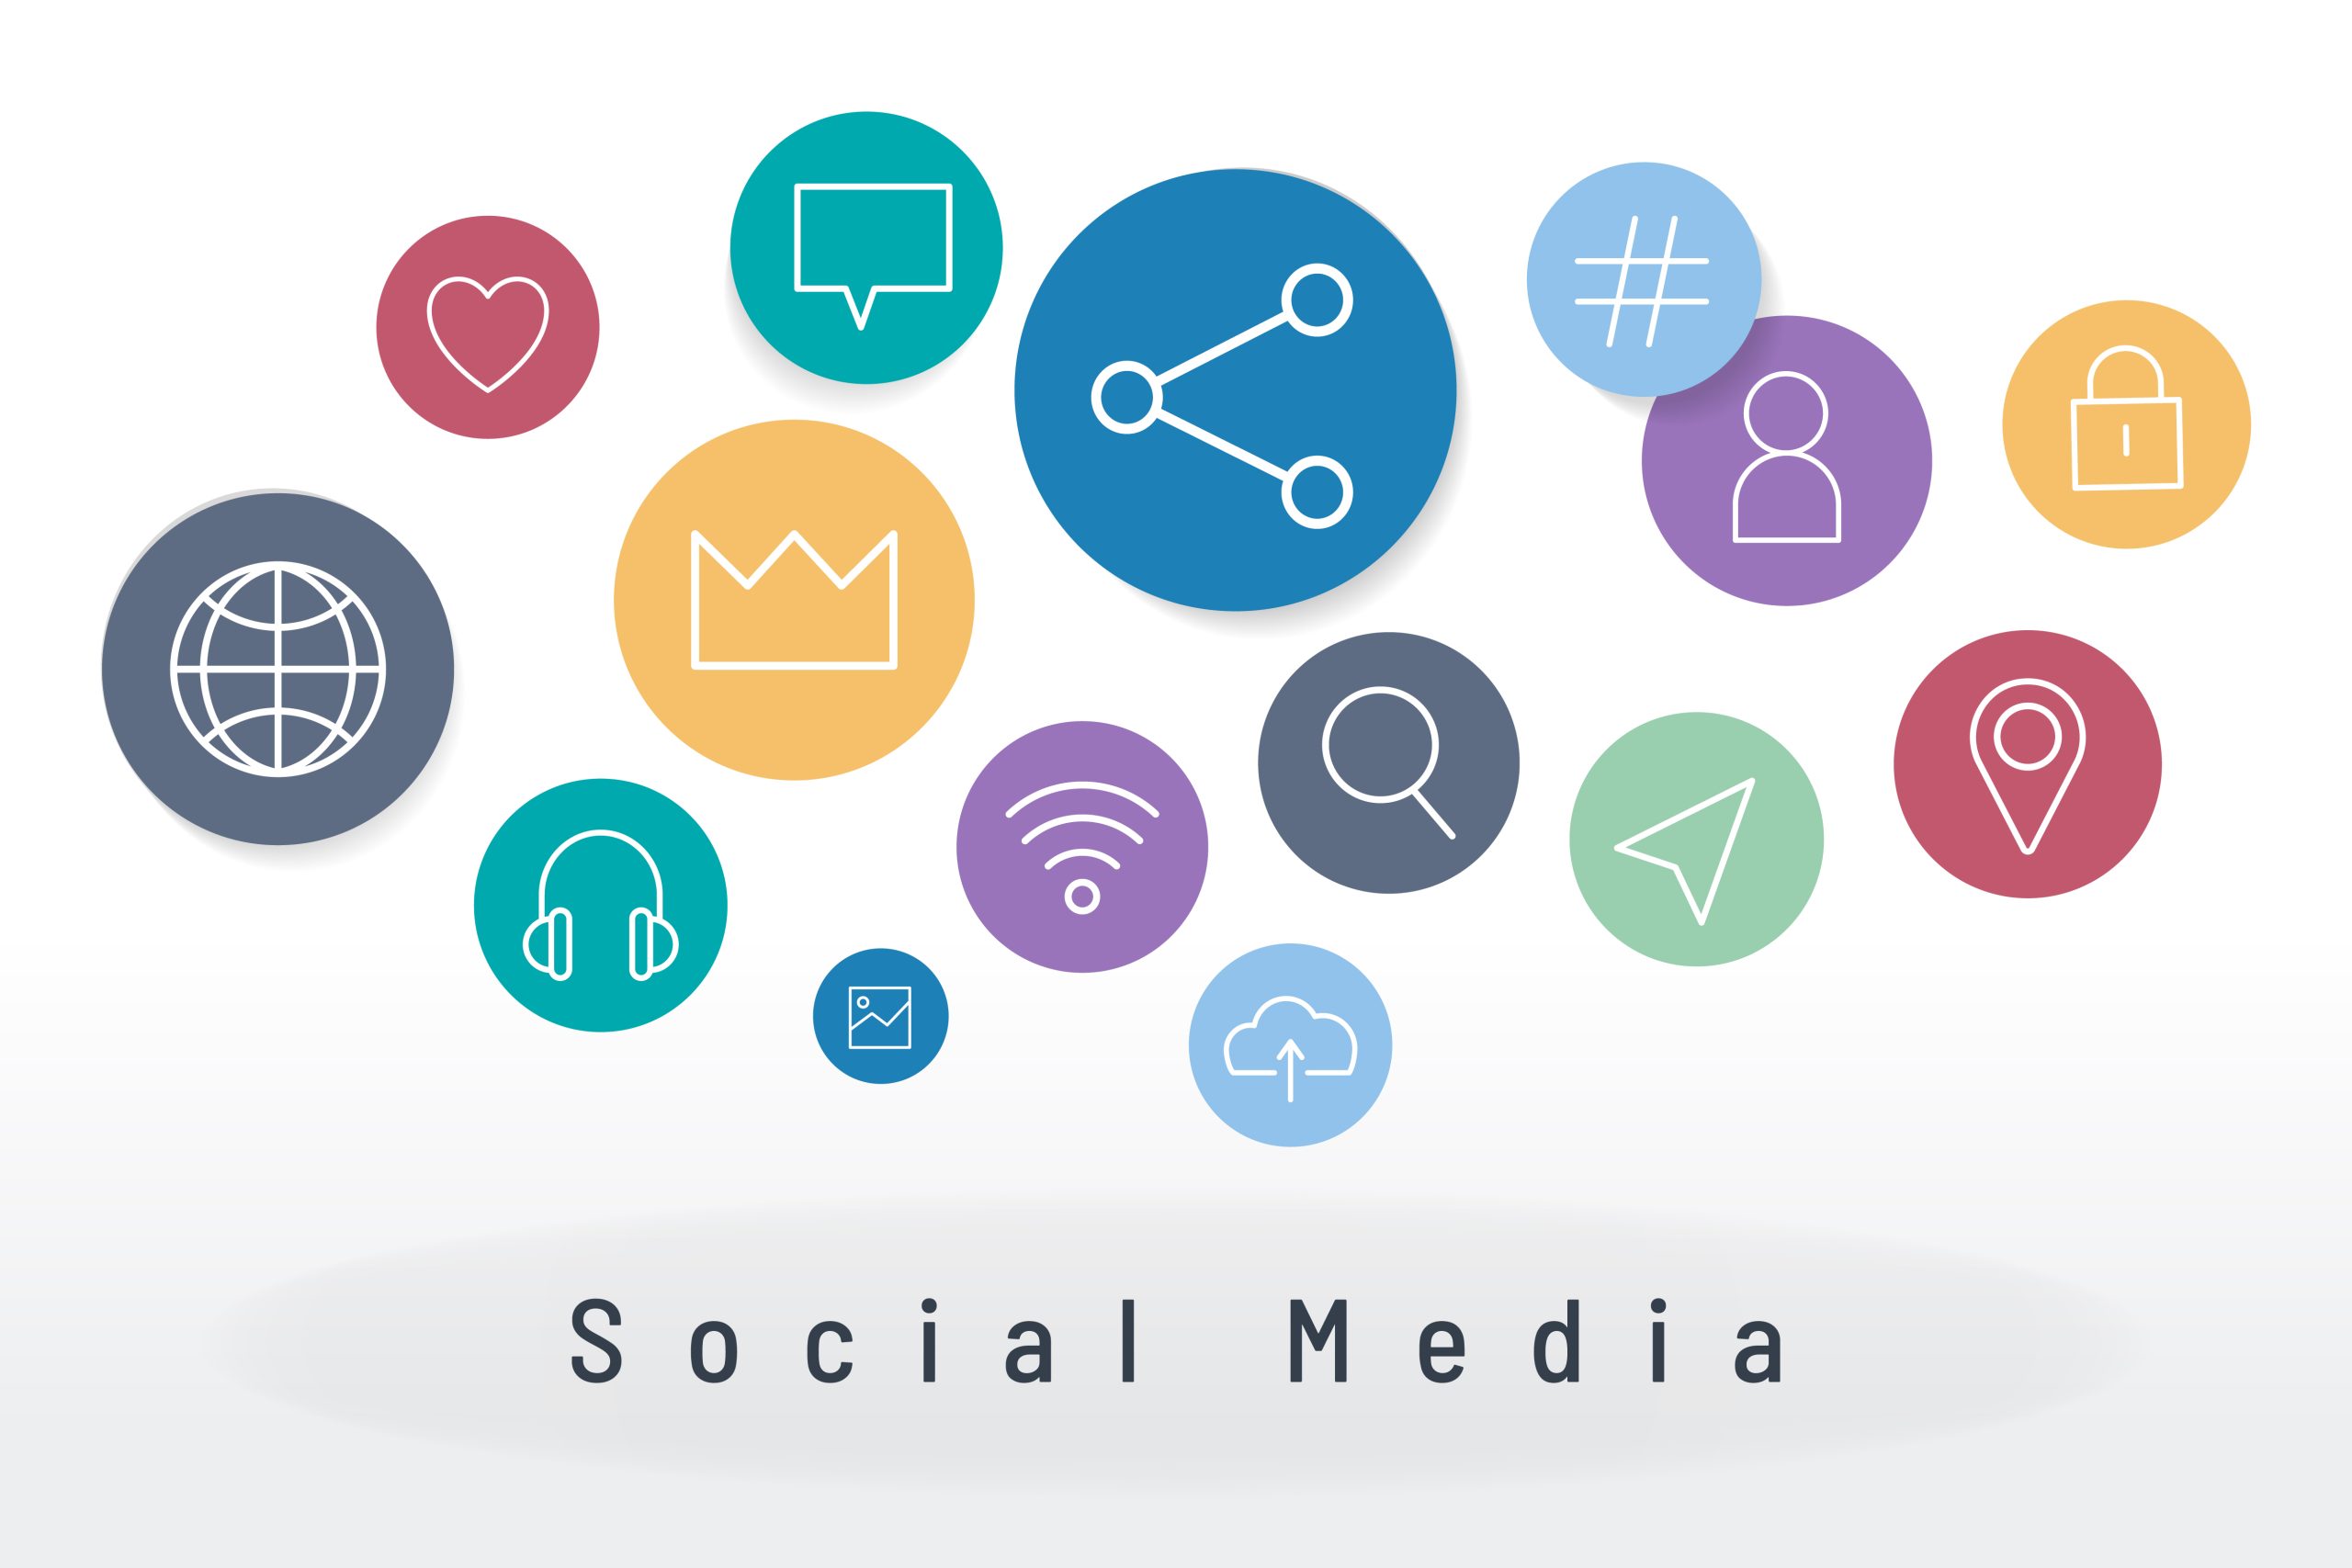 Social media icons - share concept